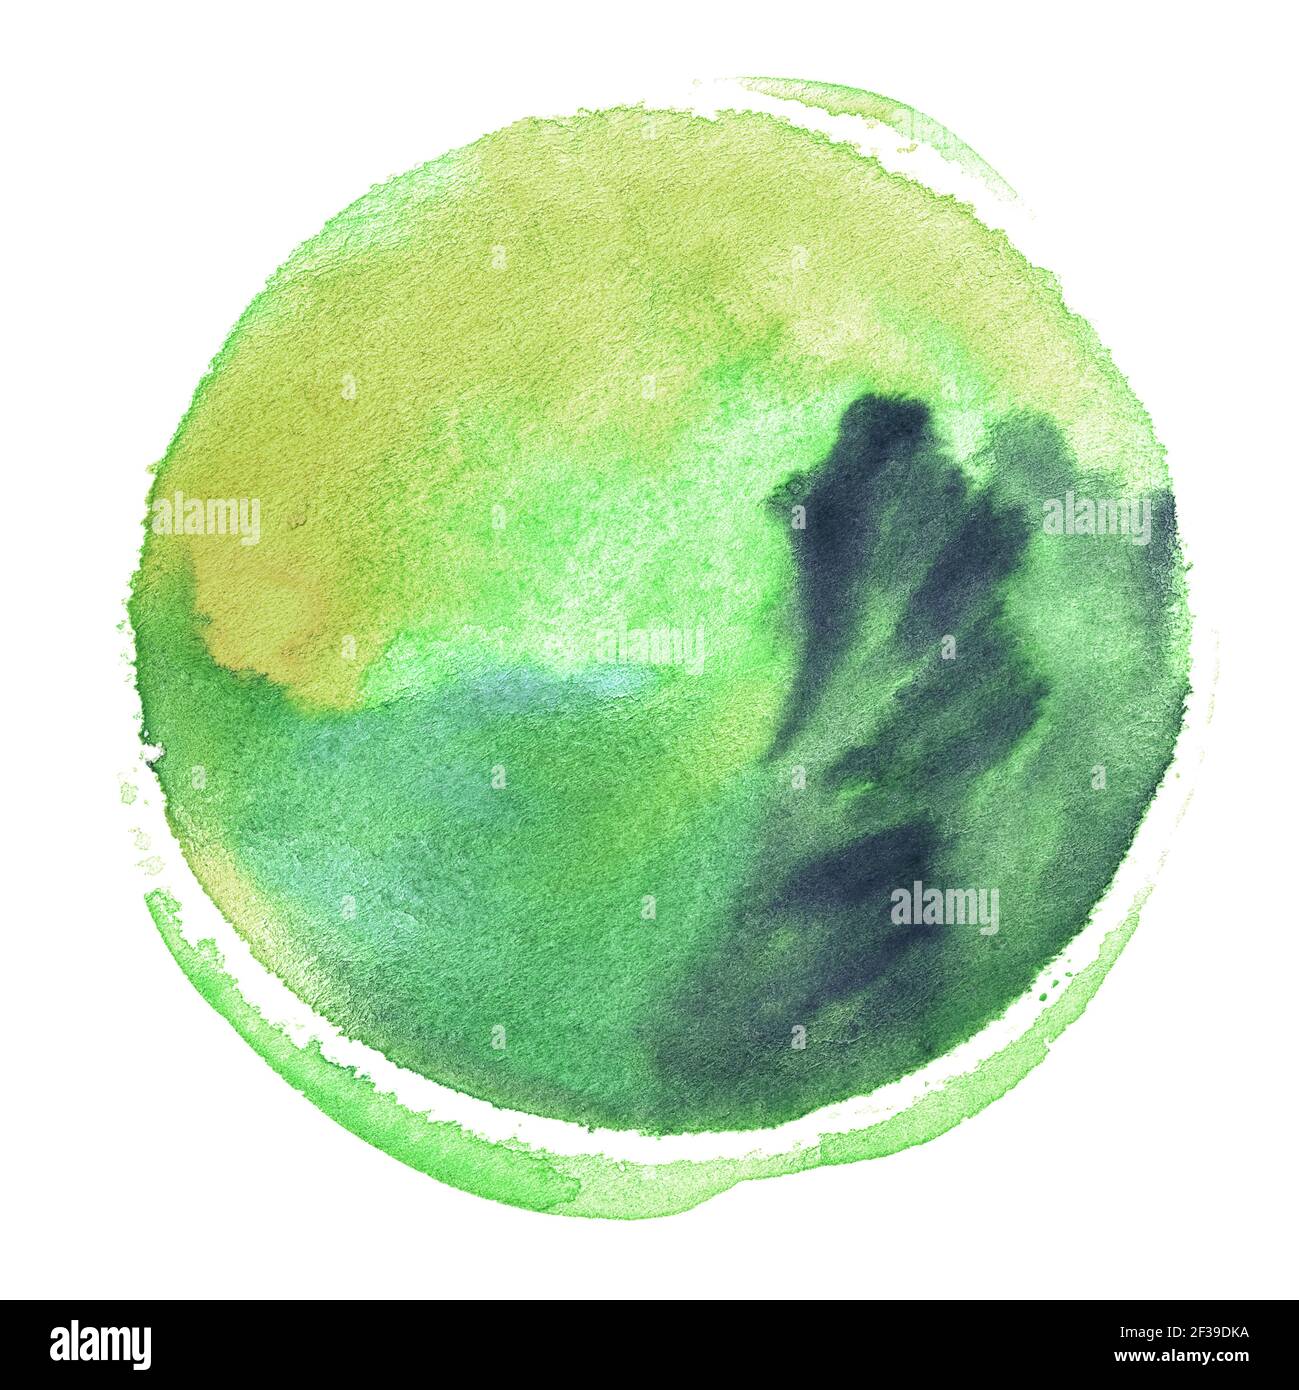 Colorful watercolor sphere. Grunge design elements. Green wet hand painted round blotch circle. Abstract painting. Stock Photo